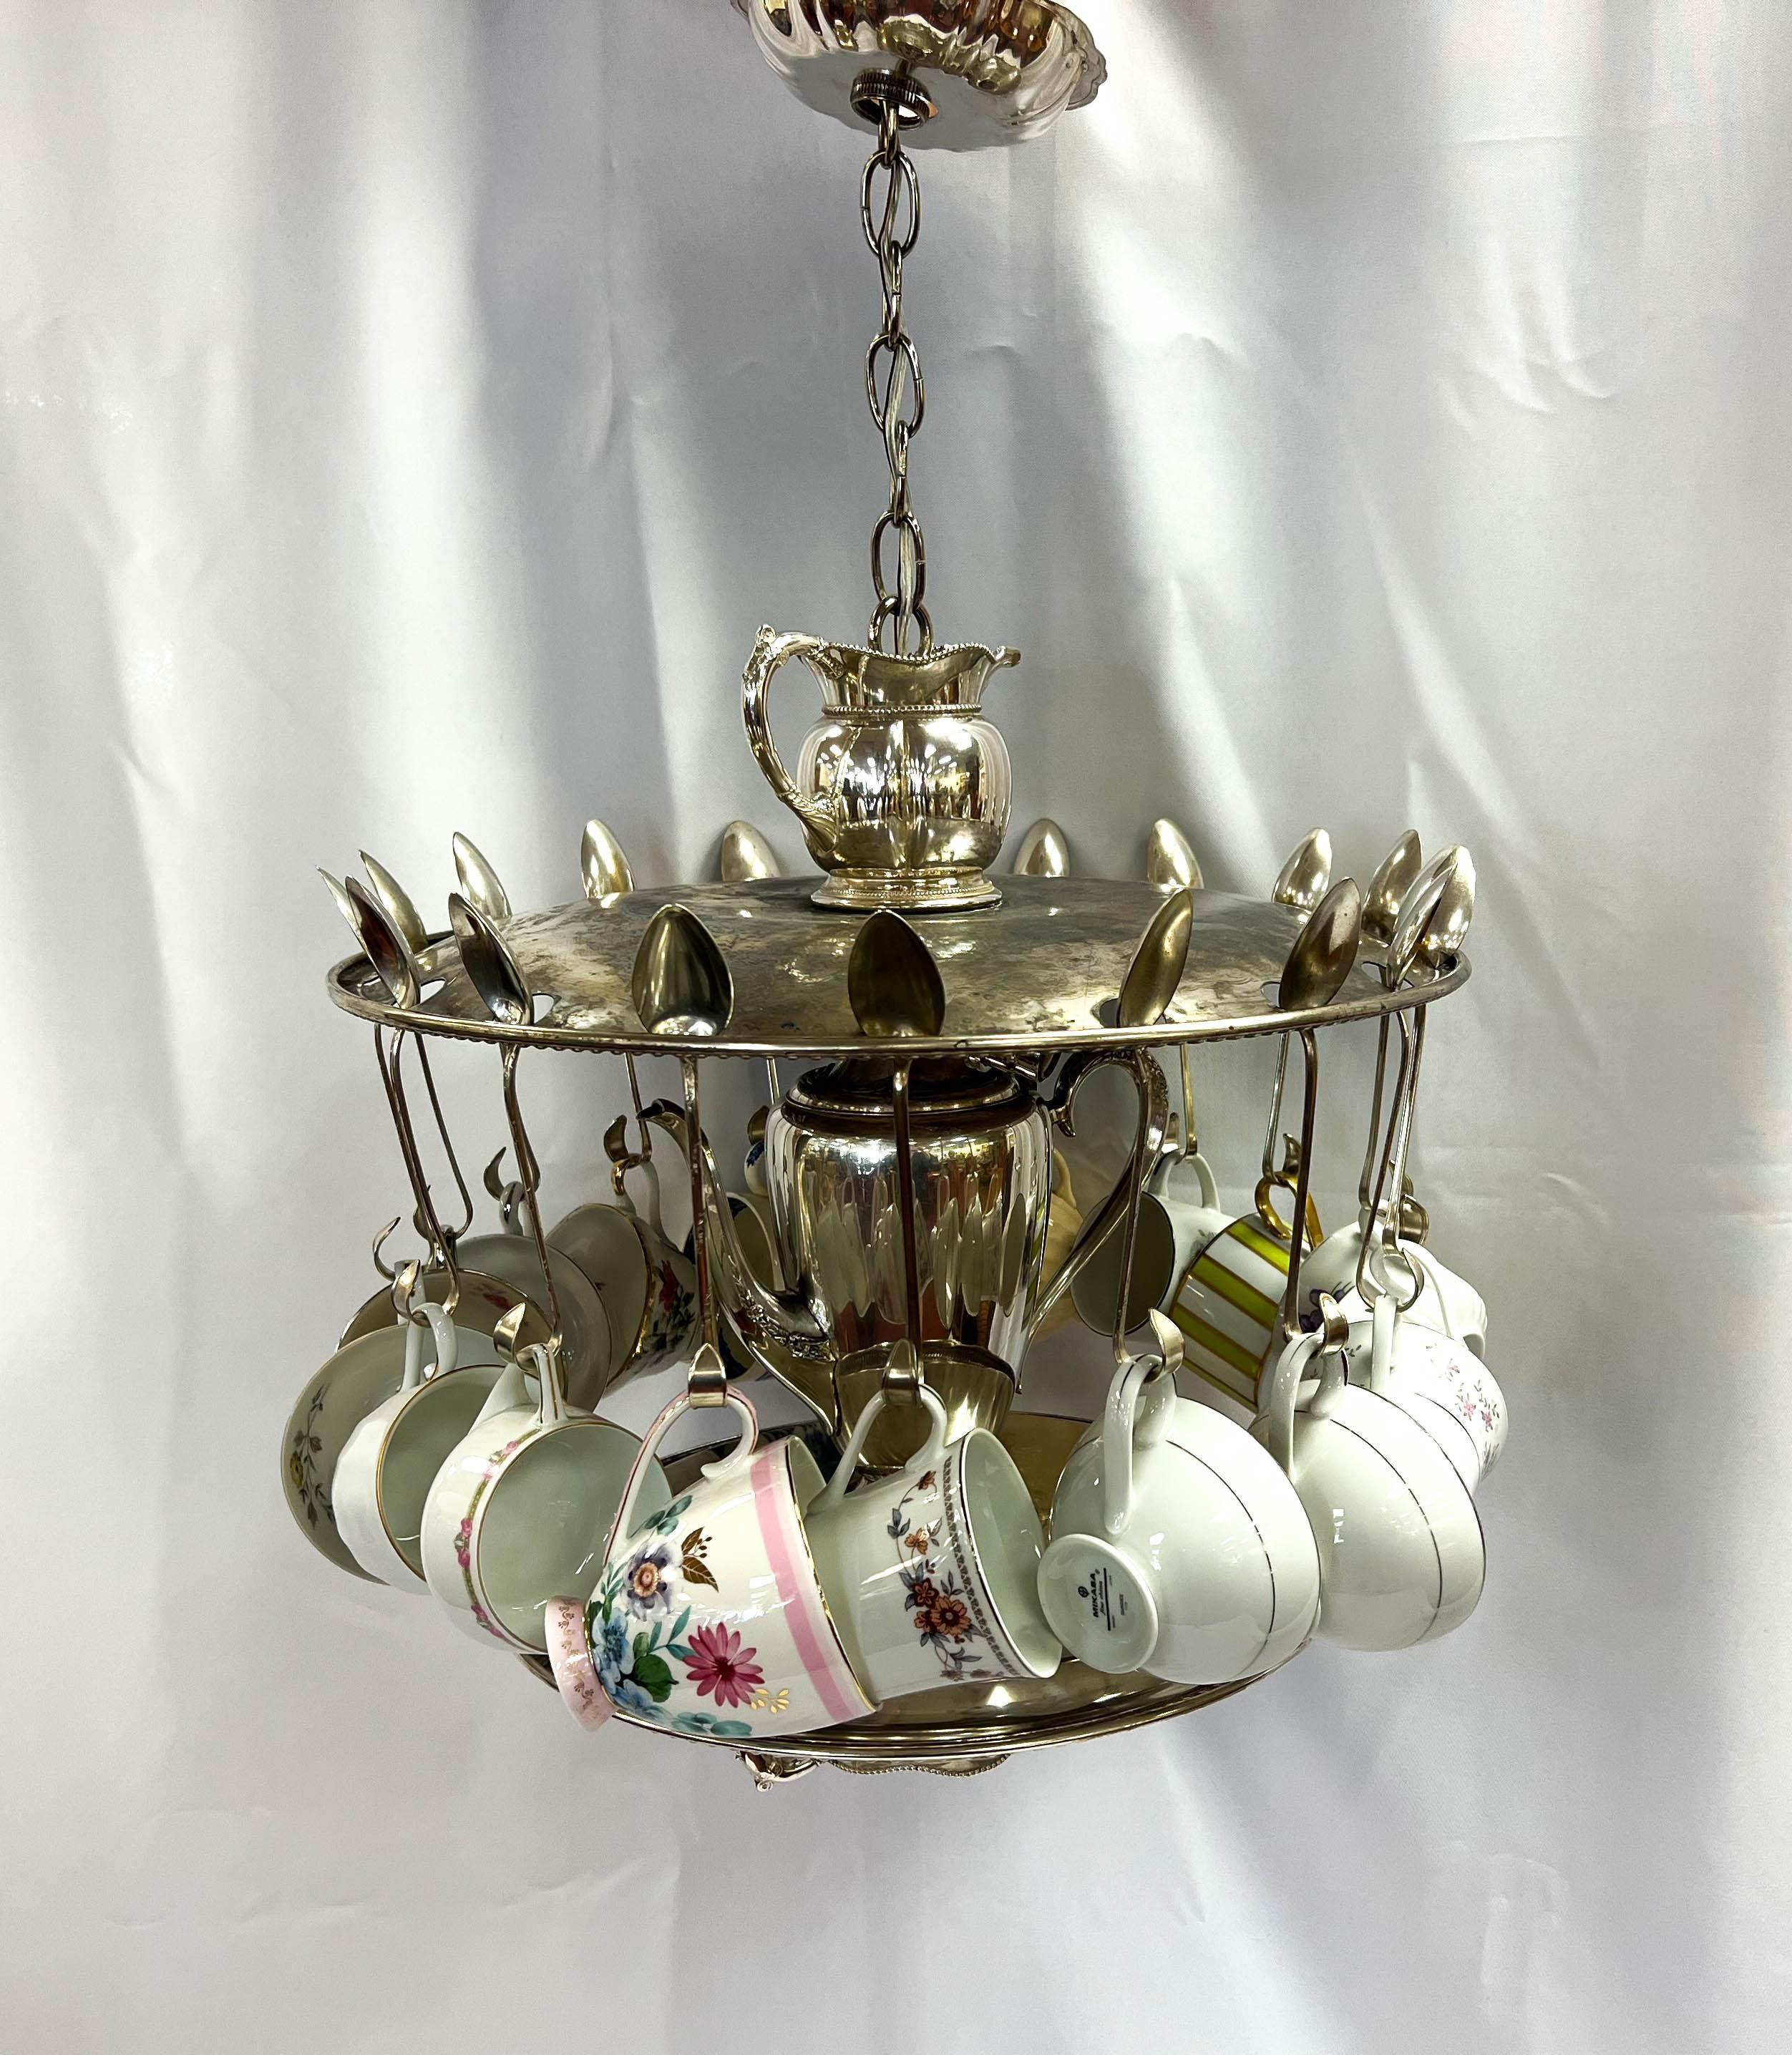 Hand-crafted novelty chandelier made entirely from silver plate service pieces, adorned with an assortment of porcelain teacups. Cups may be switched out to match your decor or rearranged as they hang freely on this fixture. A perfect light fixture